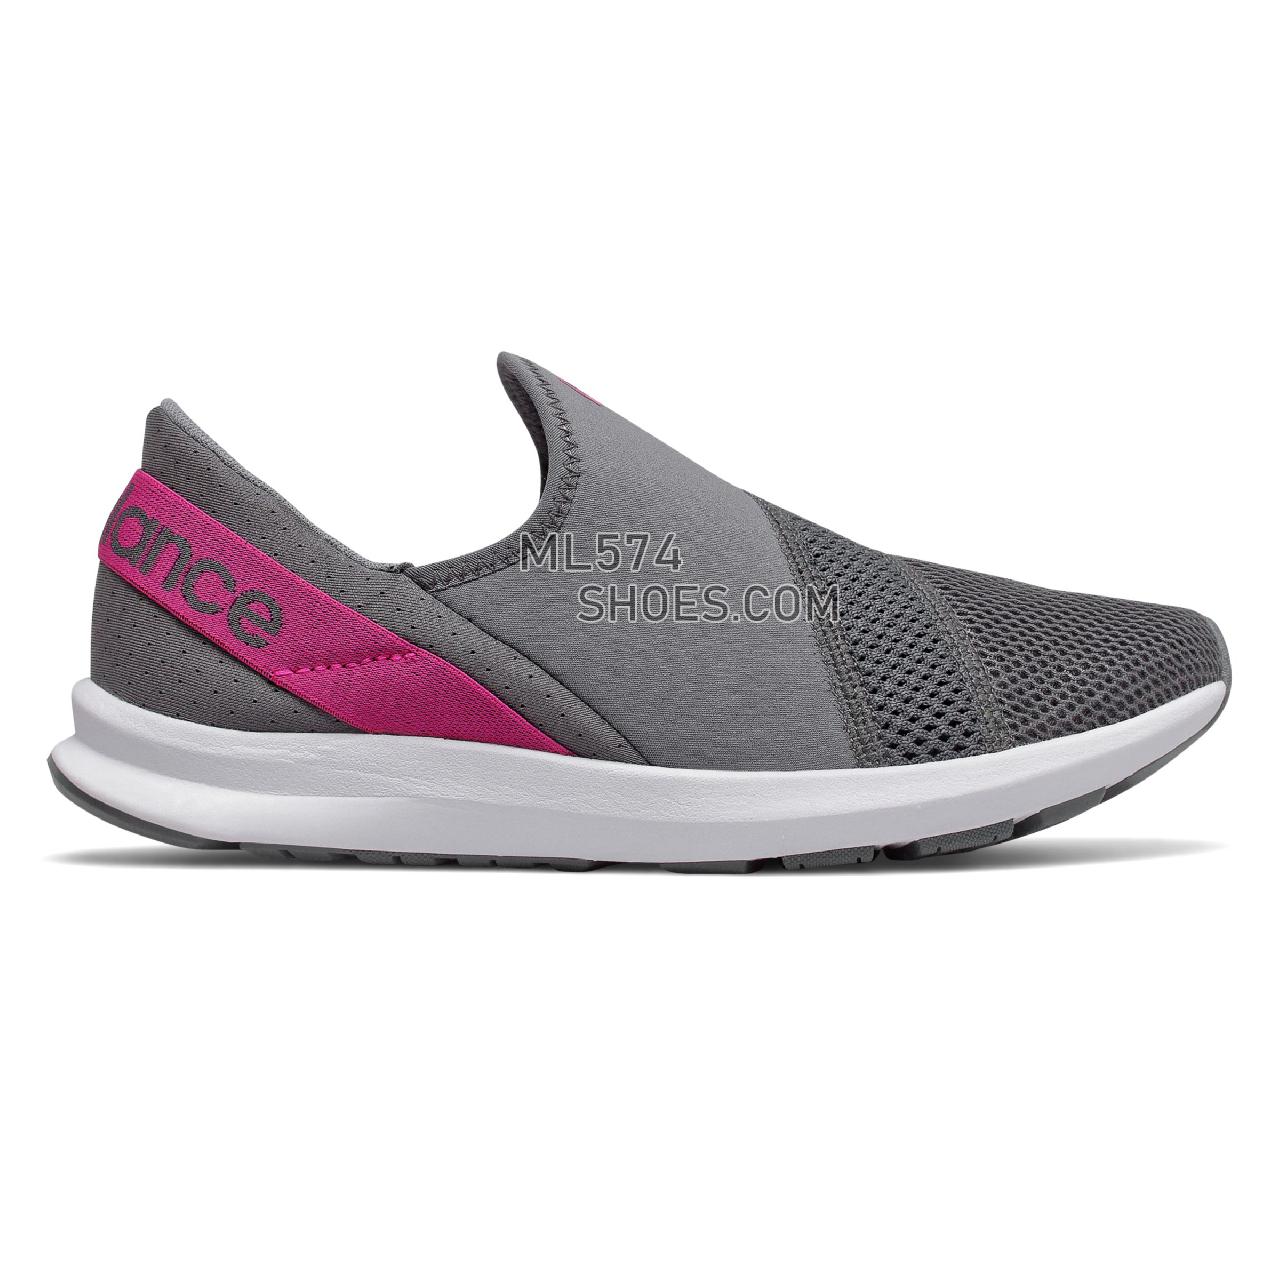 New Balance FuelCore Nergize Easy Slip-On - Women's Sport Style Sneakers - Lead with Carnival - WLNRSLL1